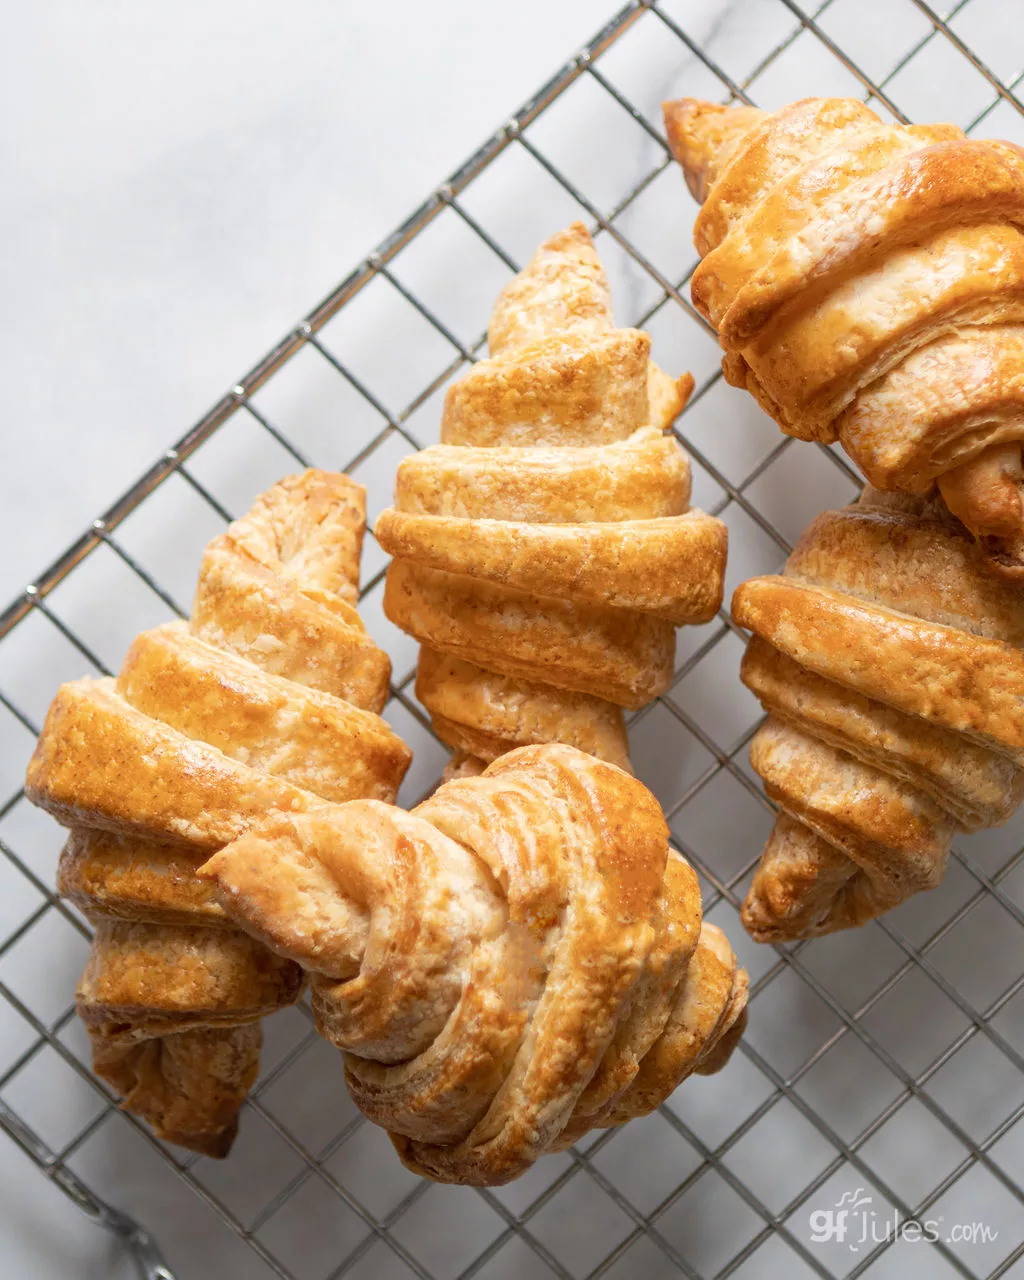 Homemade Classic Croissant Recipe - Breads and Sweets